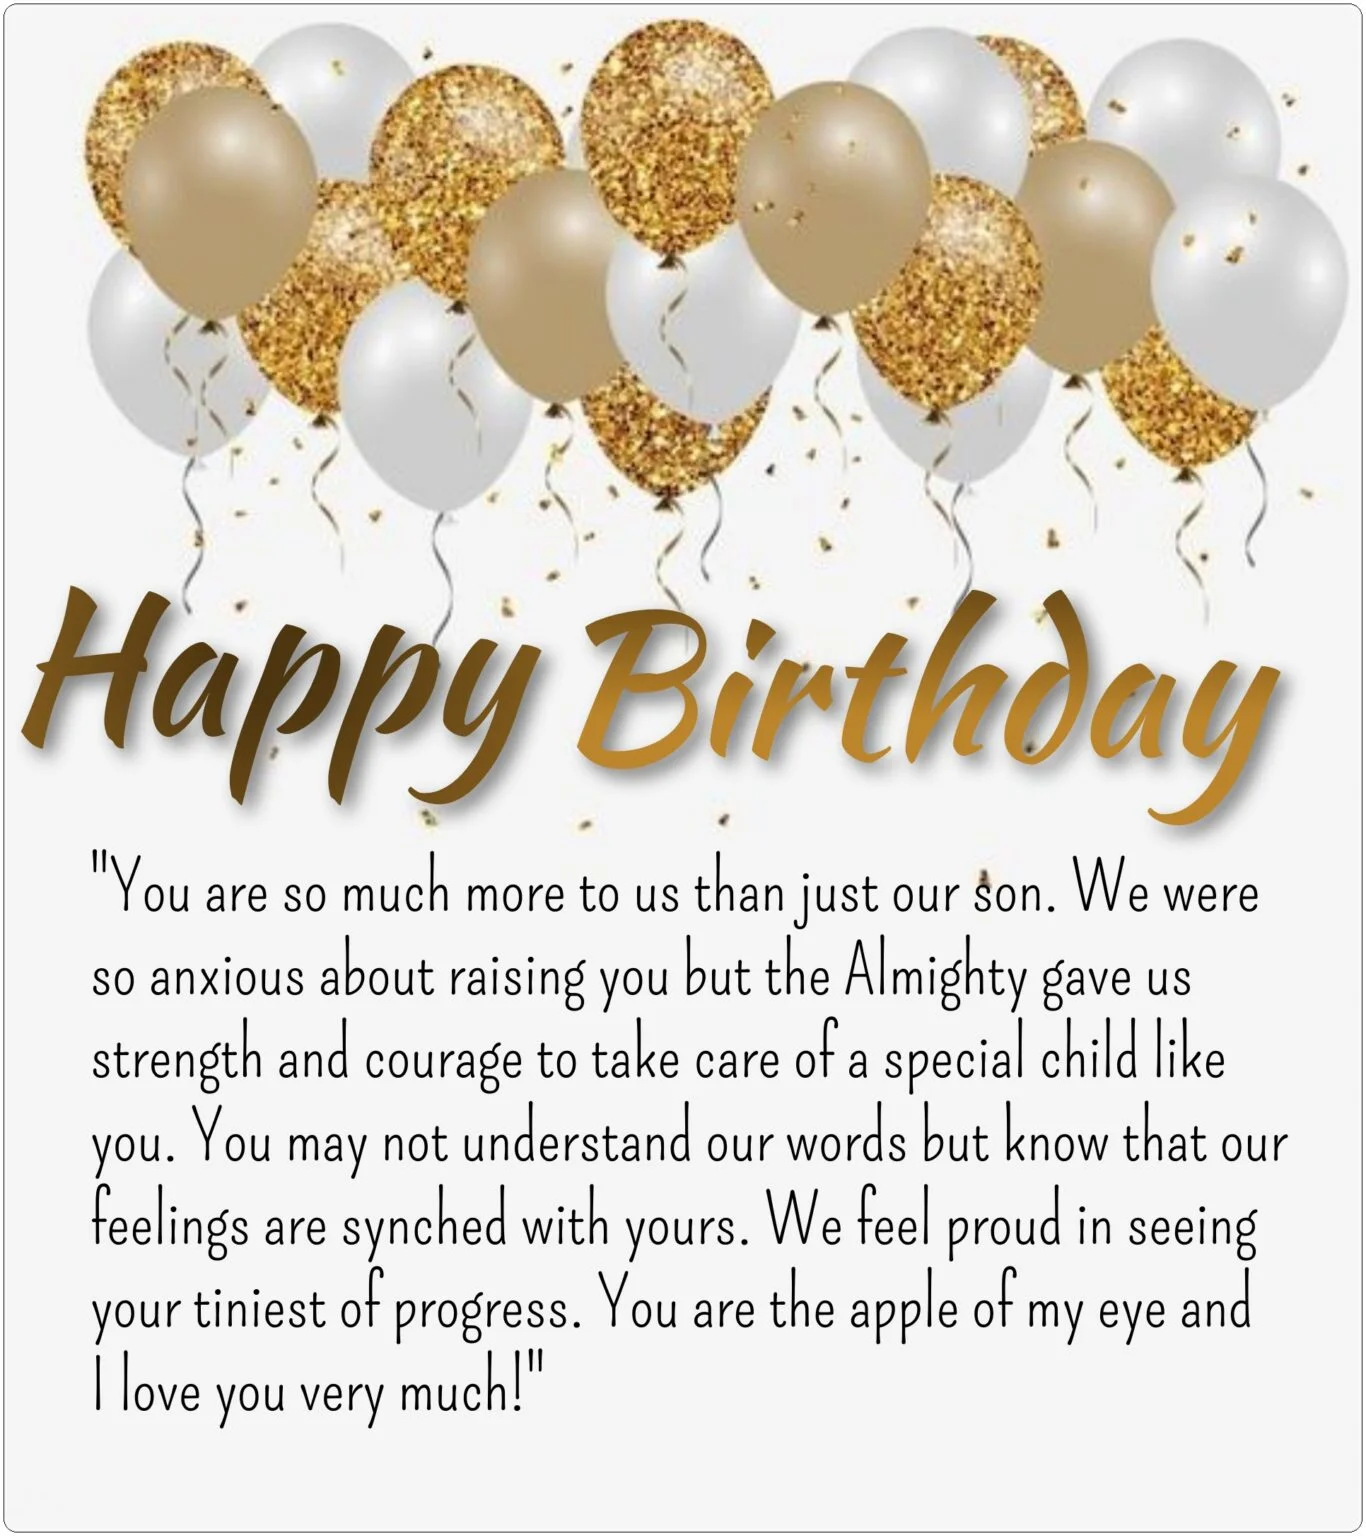 Birthday wishes for kids with Special Needs, Autistic, Down Syndrome ...